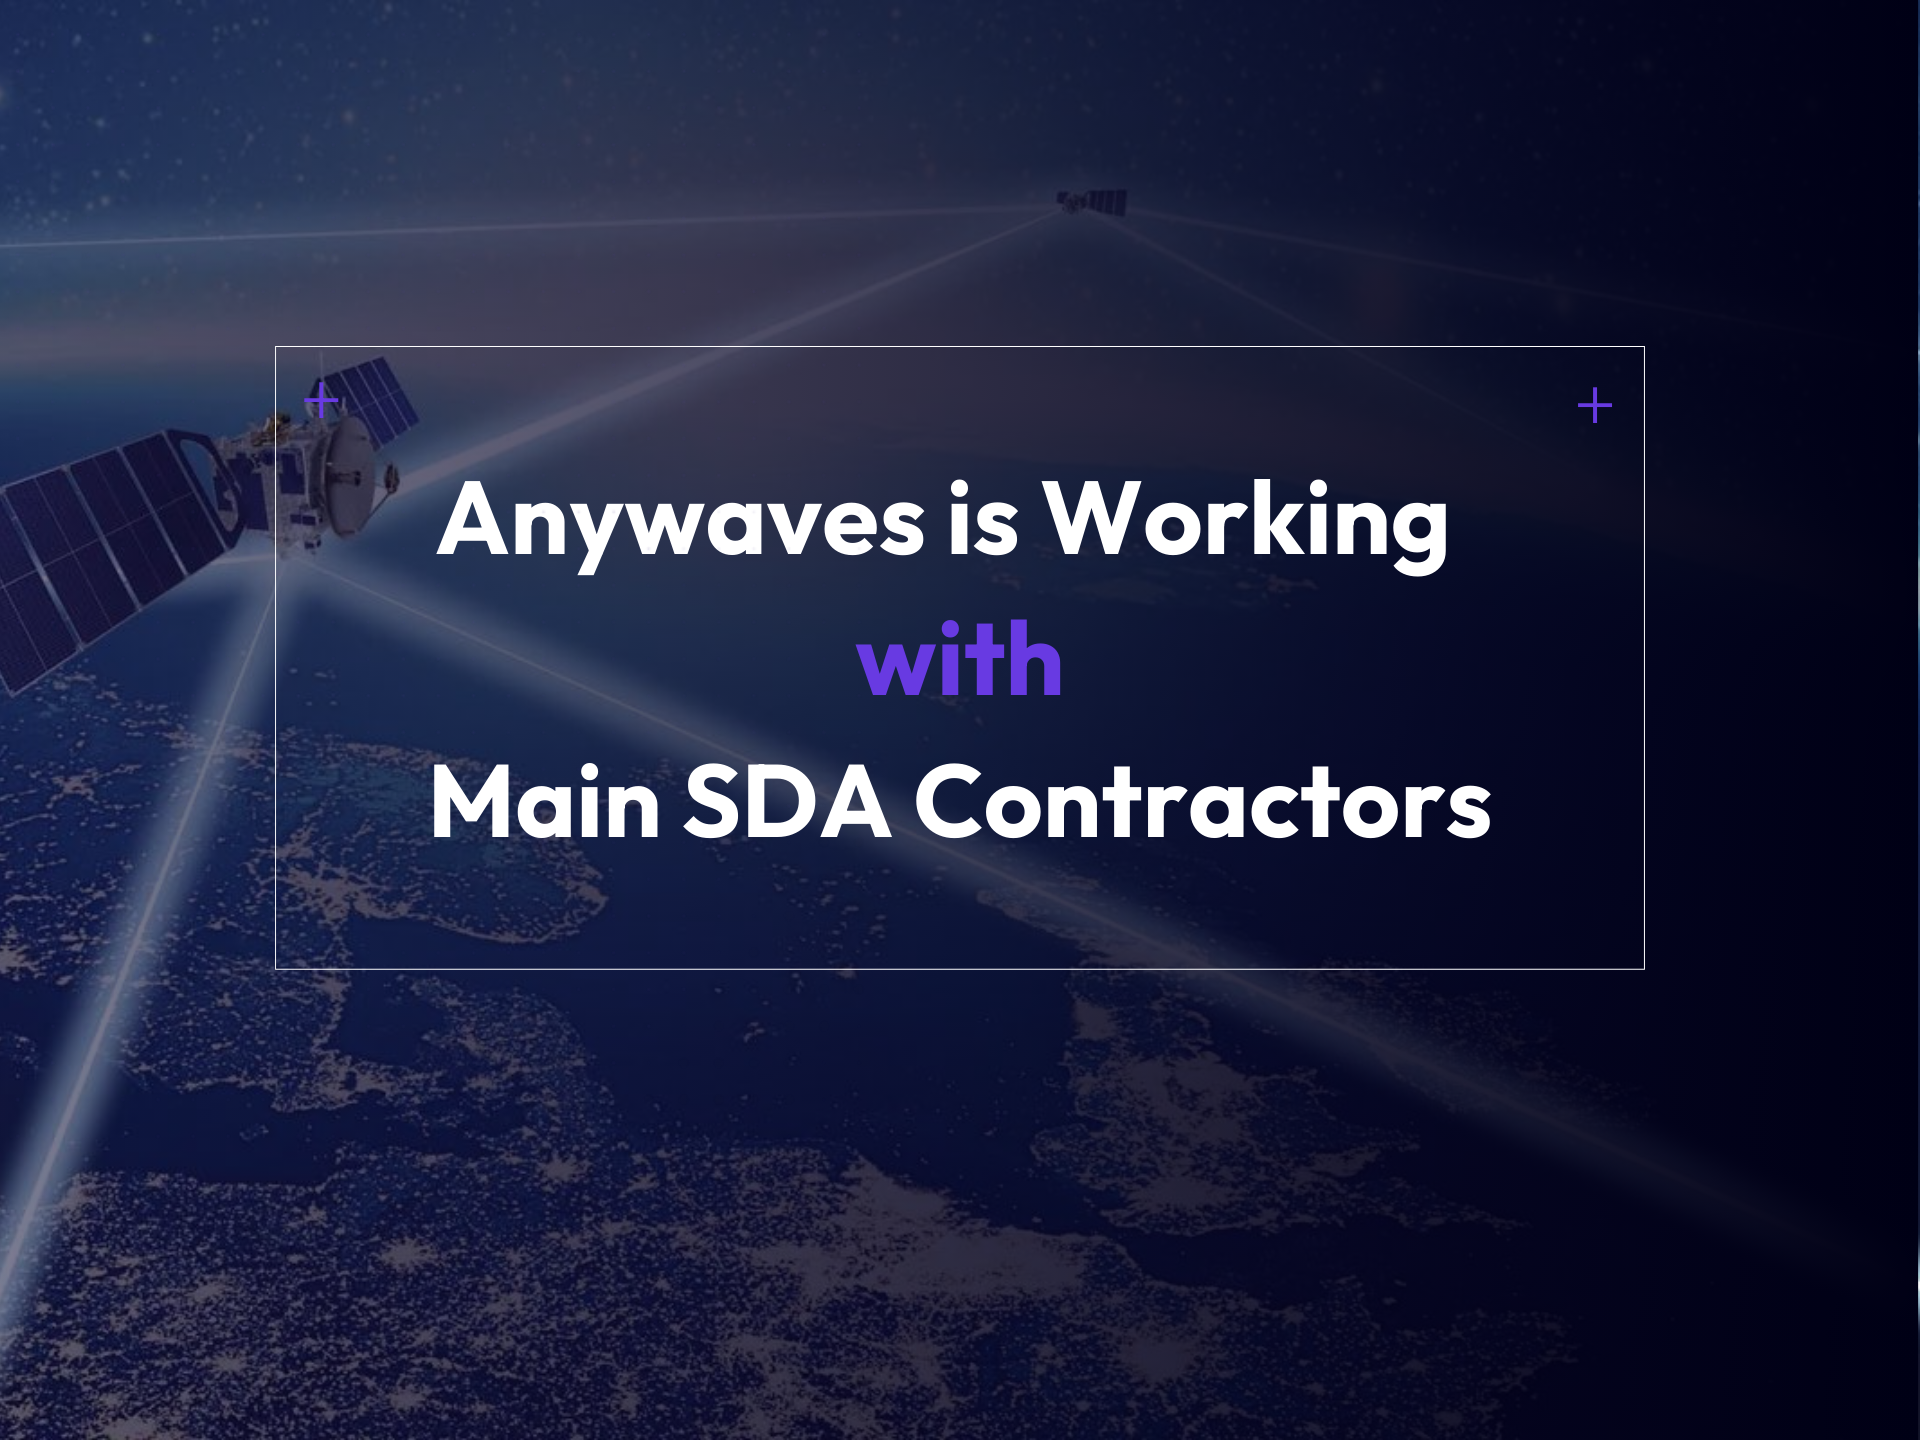 Anywaves working with main SDA Contractors